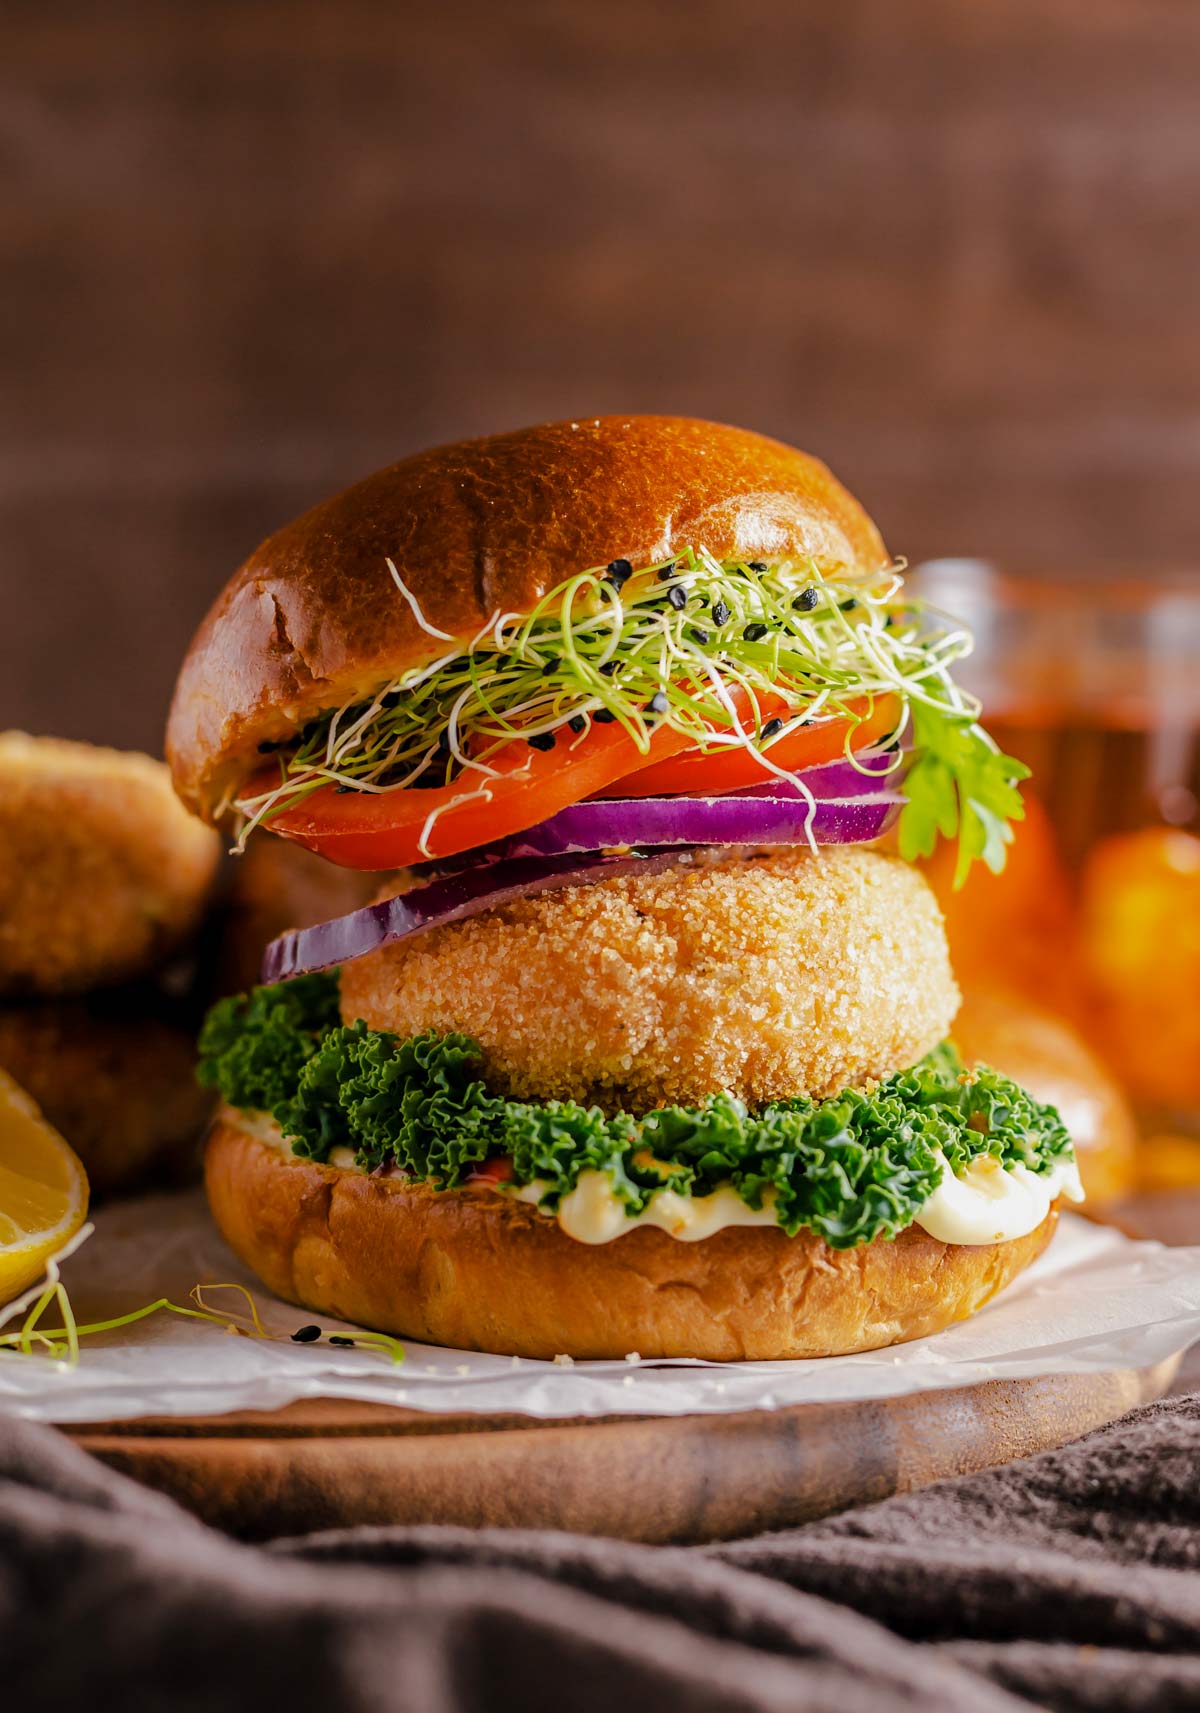 salmon patties served between burger buns, greens, tomato, red onion